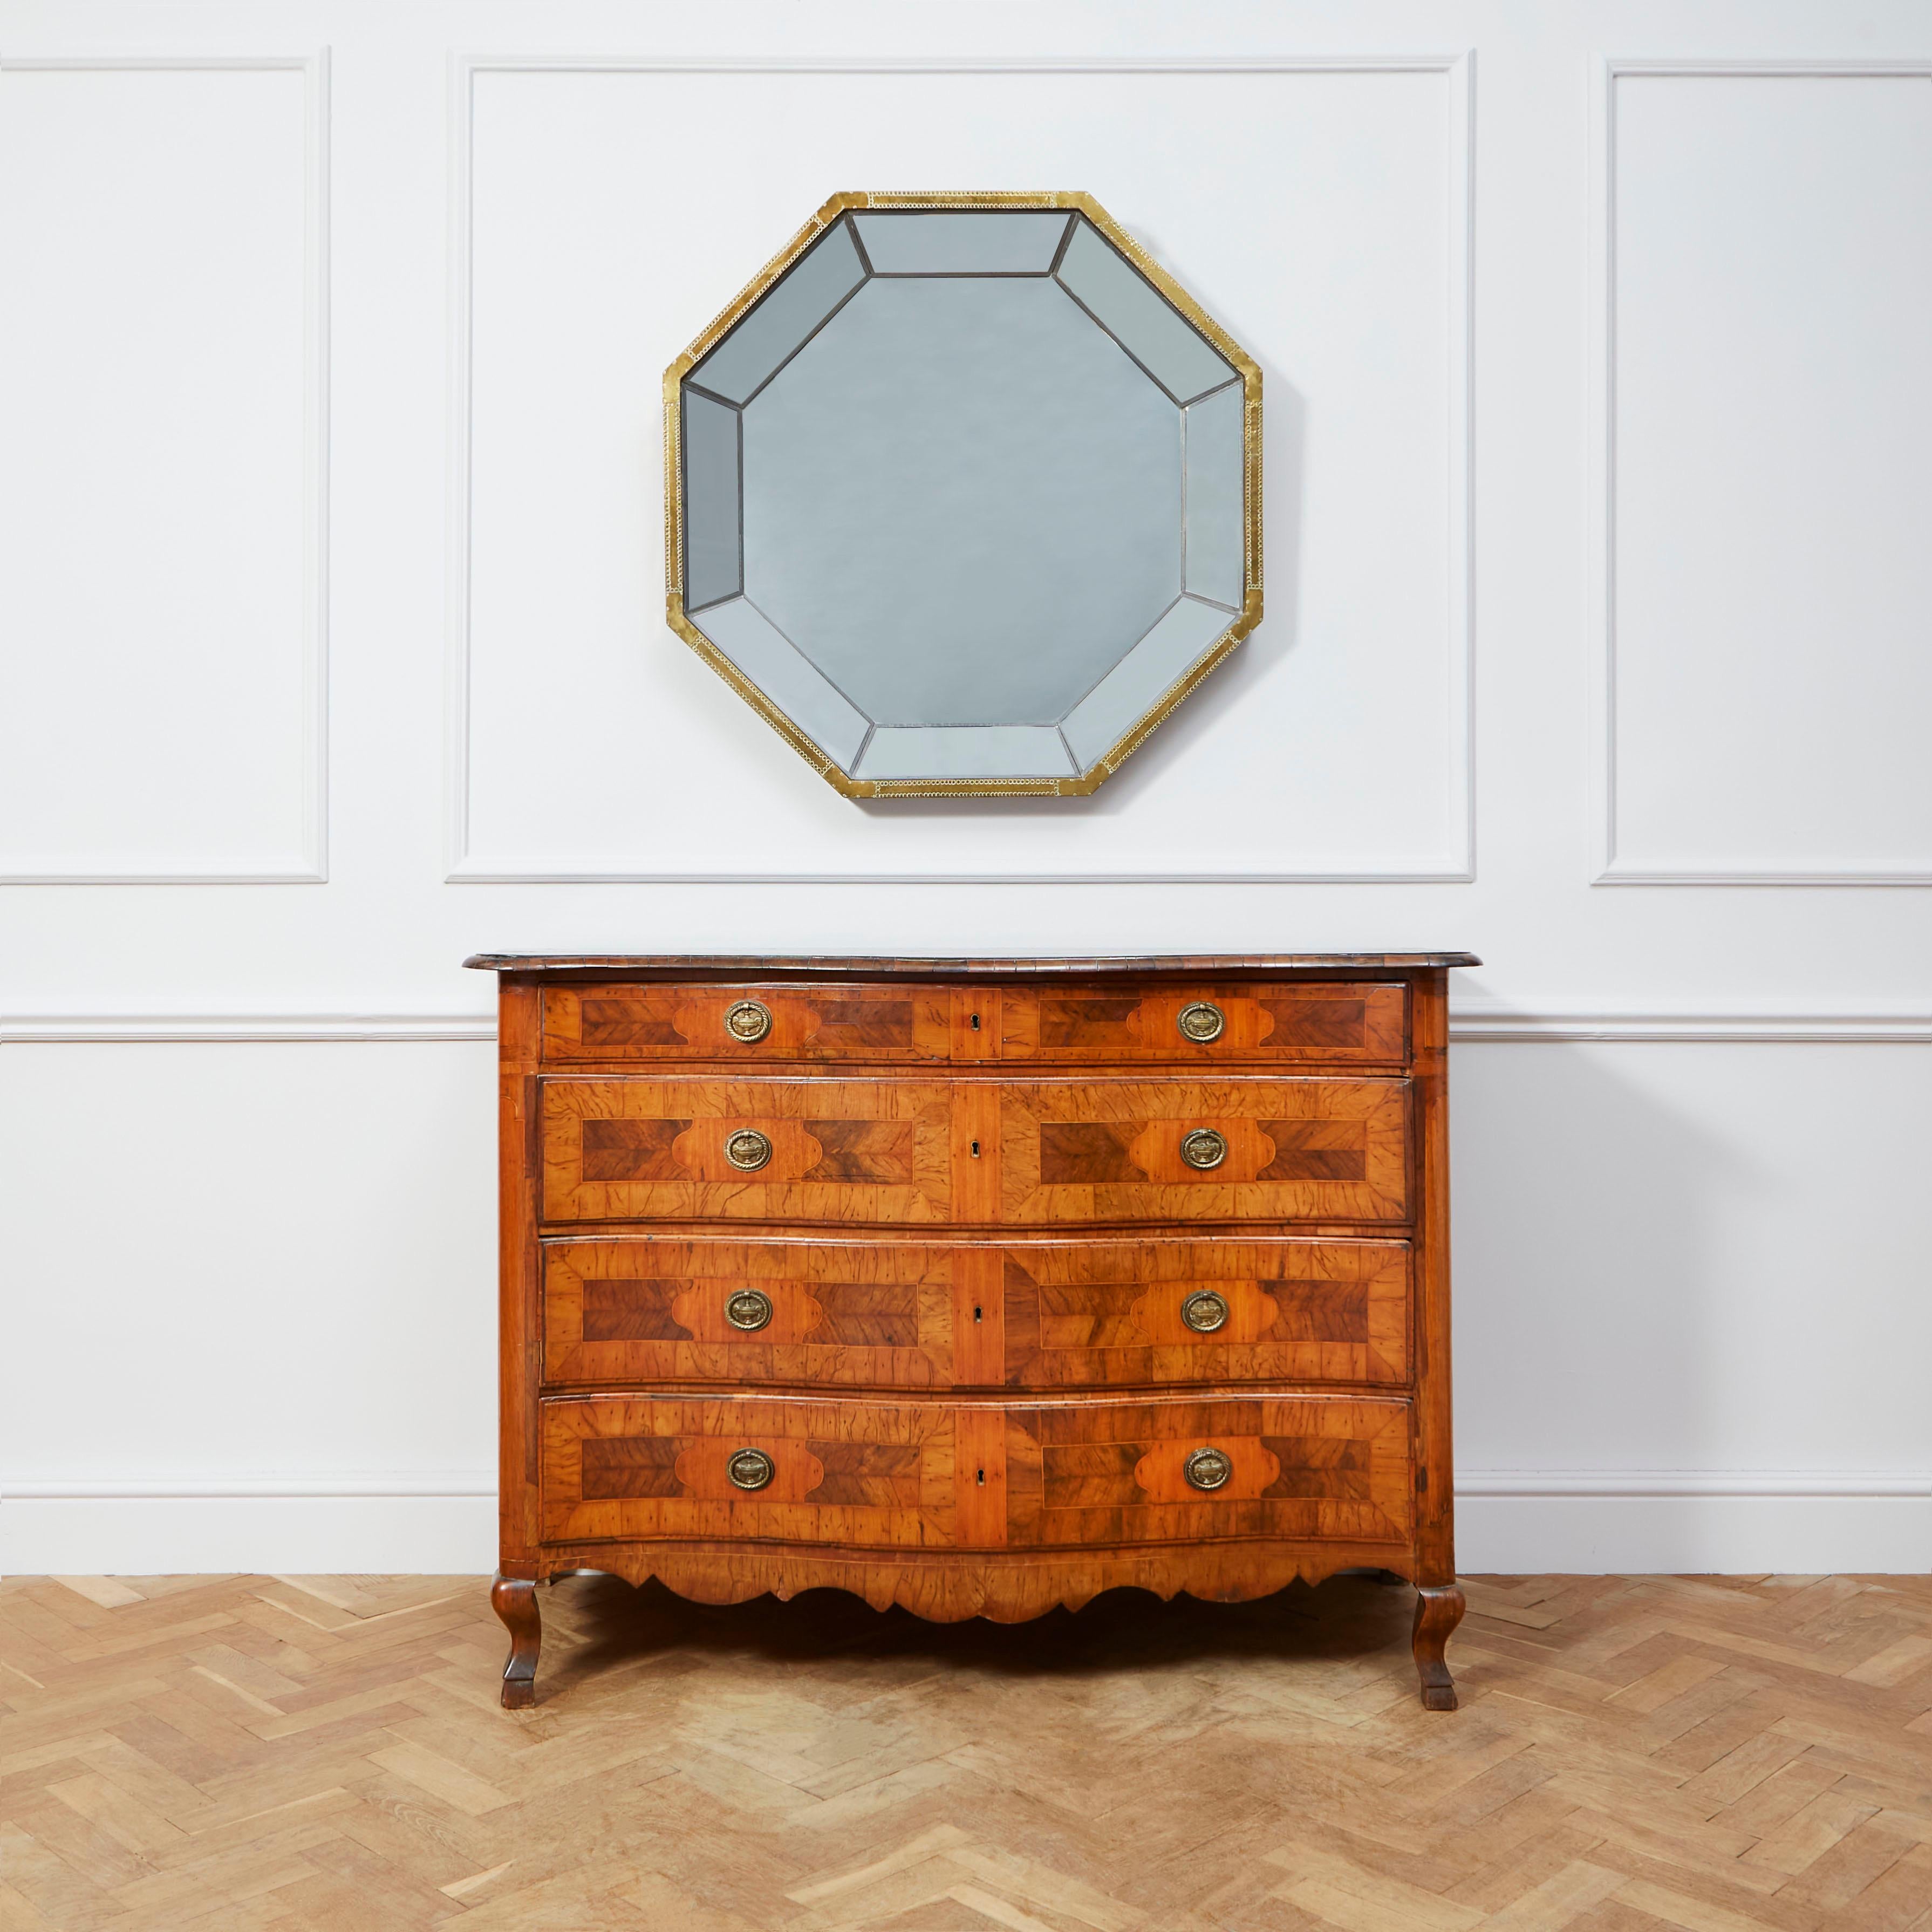 A large and substantial mid twentieth century octagonal mirror with nailed sheet brass decorated with punch work and segmented mirror panels to interior by Spanish Designer Rudolfo Dubarry.

Spanish, 1970s

H 101 x W 101 x D 10 cms